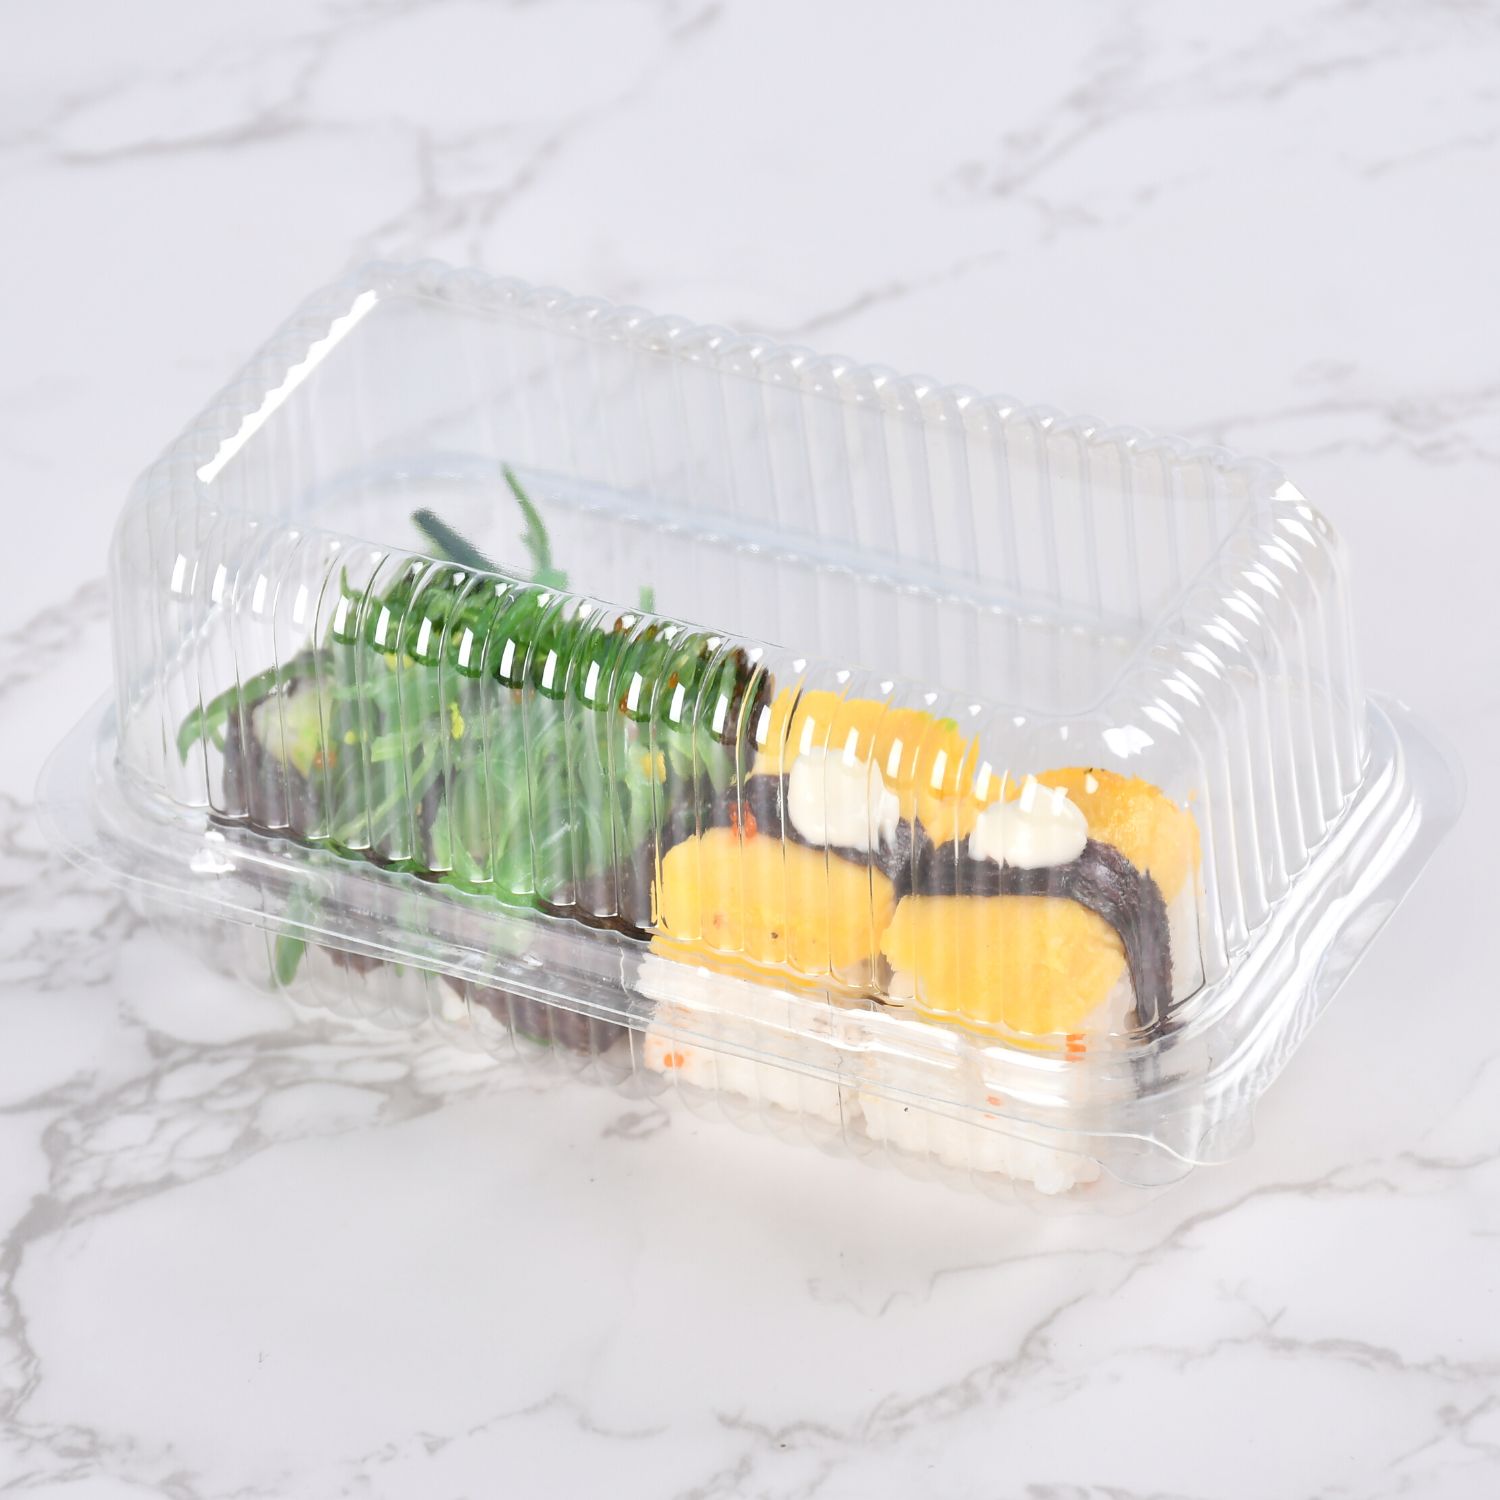 Transparent clamshell container with 4 pieces of sushi